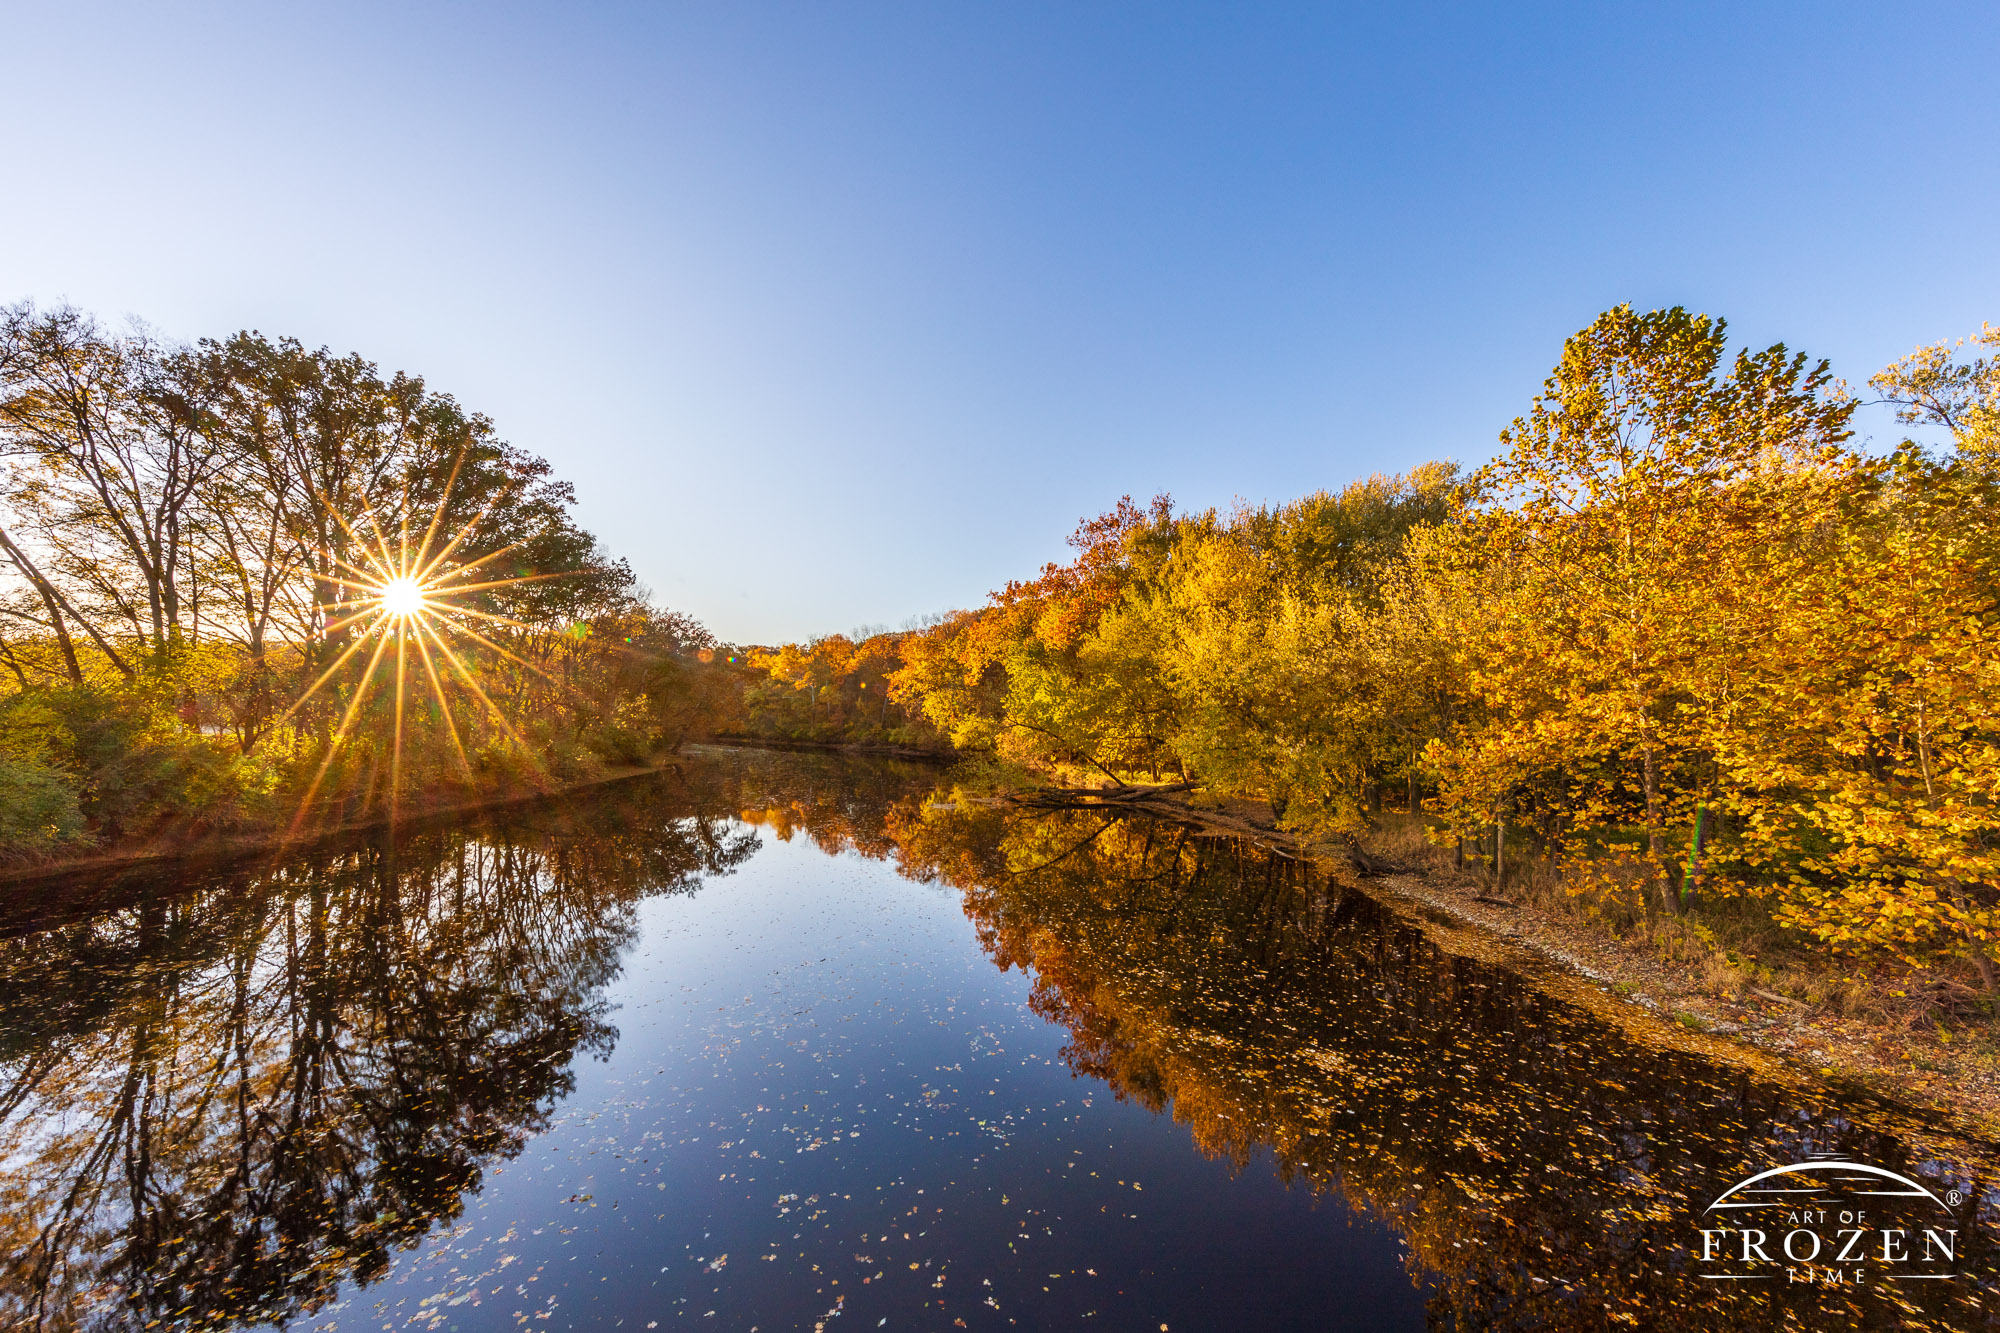 A classic Ohio scene where the Great Miami River takes on a glassy surface and brightly reflects the sun’s last rays